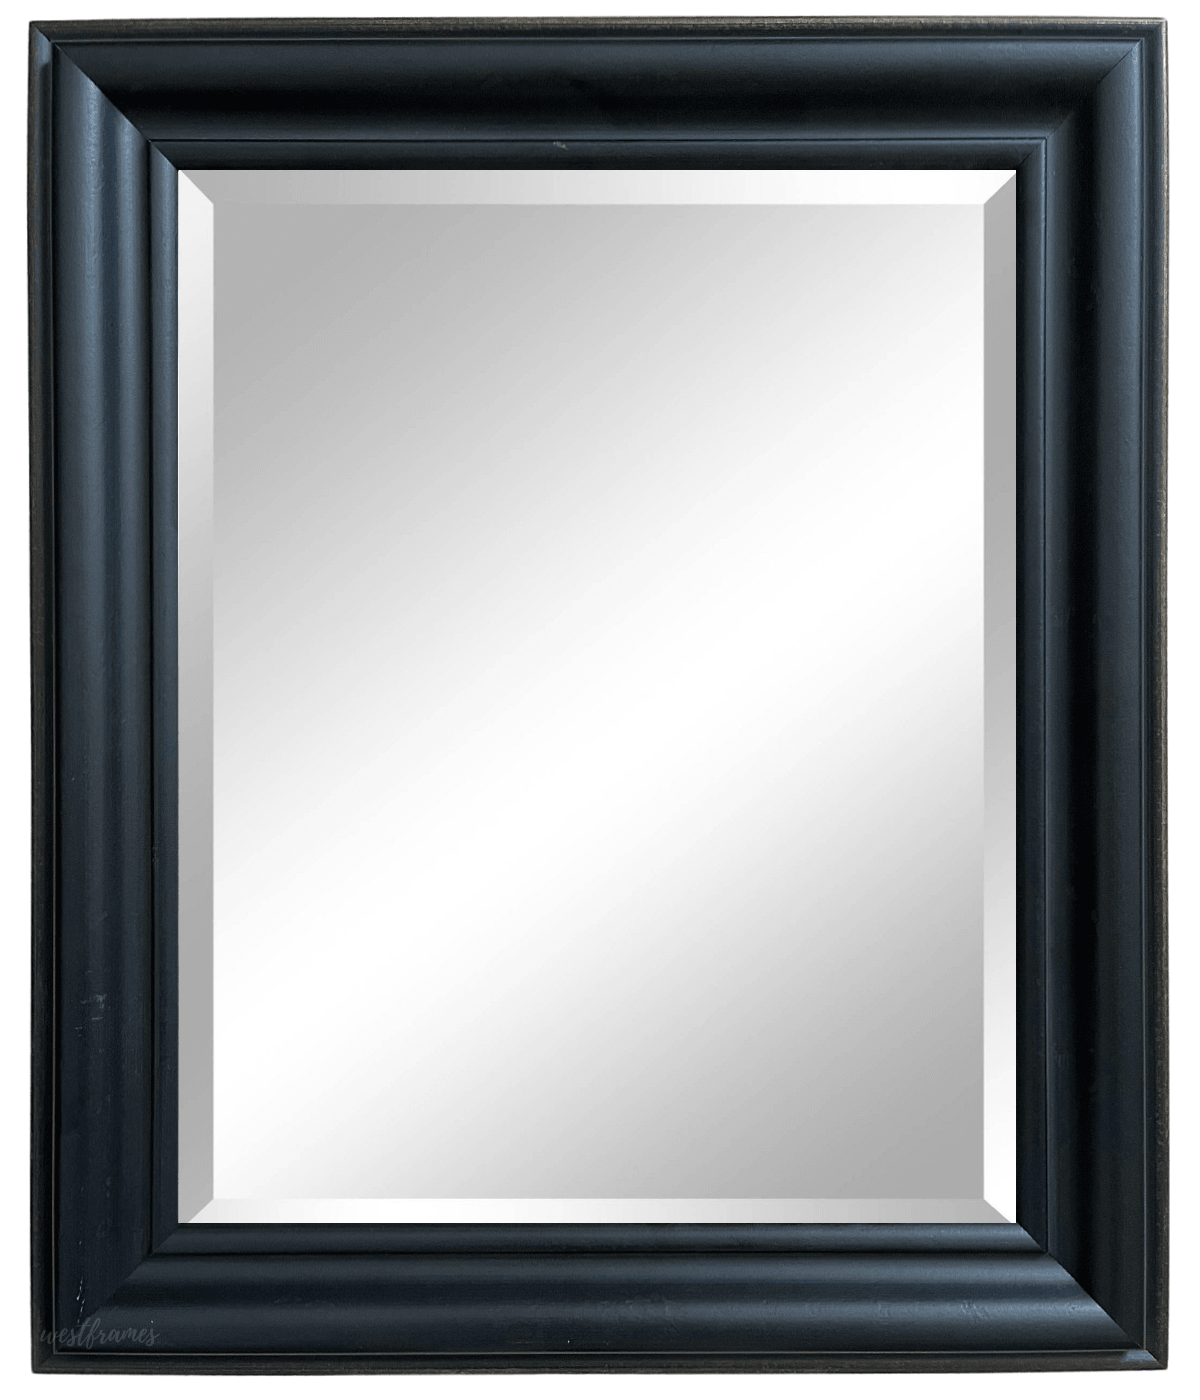 Vienna Rustic Vintage Black Gold Trim Finish Traditional Style Wood Framed Wall Mirror 3" - West Frames